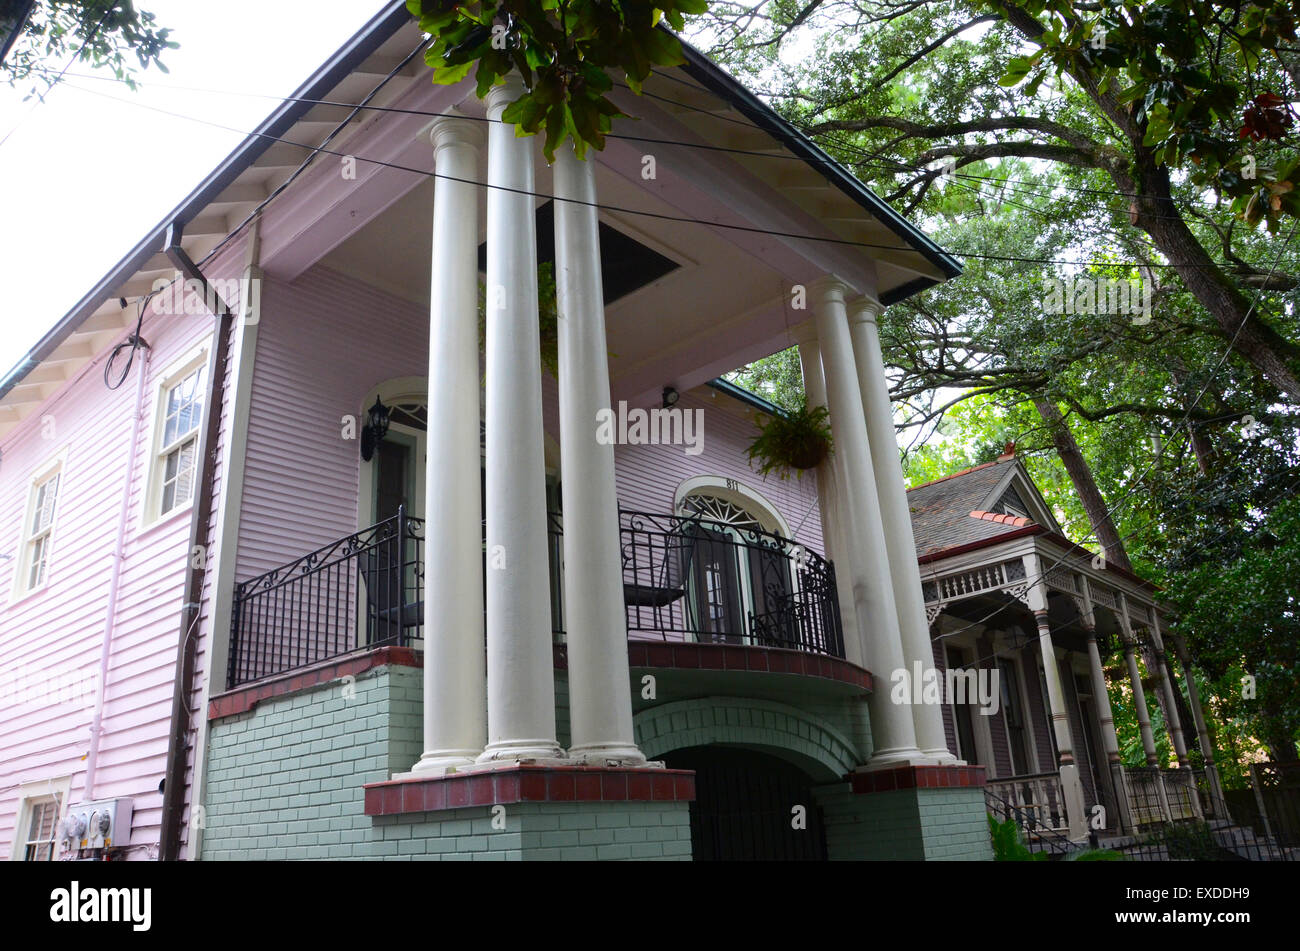 algiers new orleans houses louisiana wooden Stock Photo